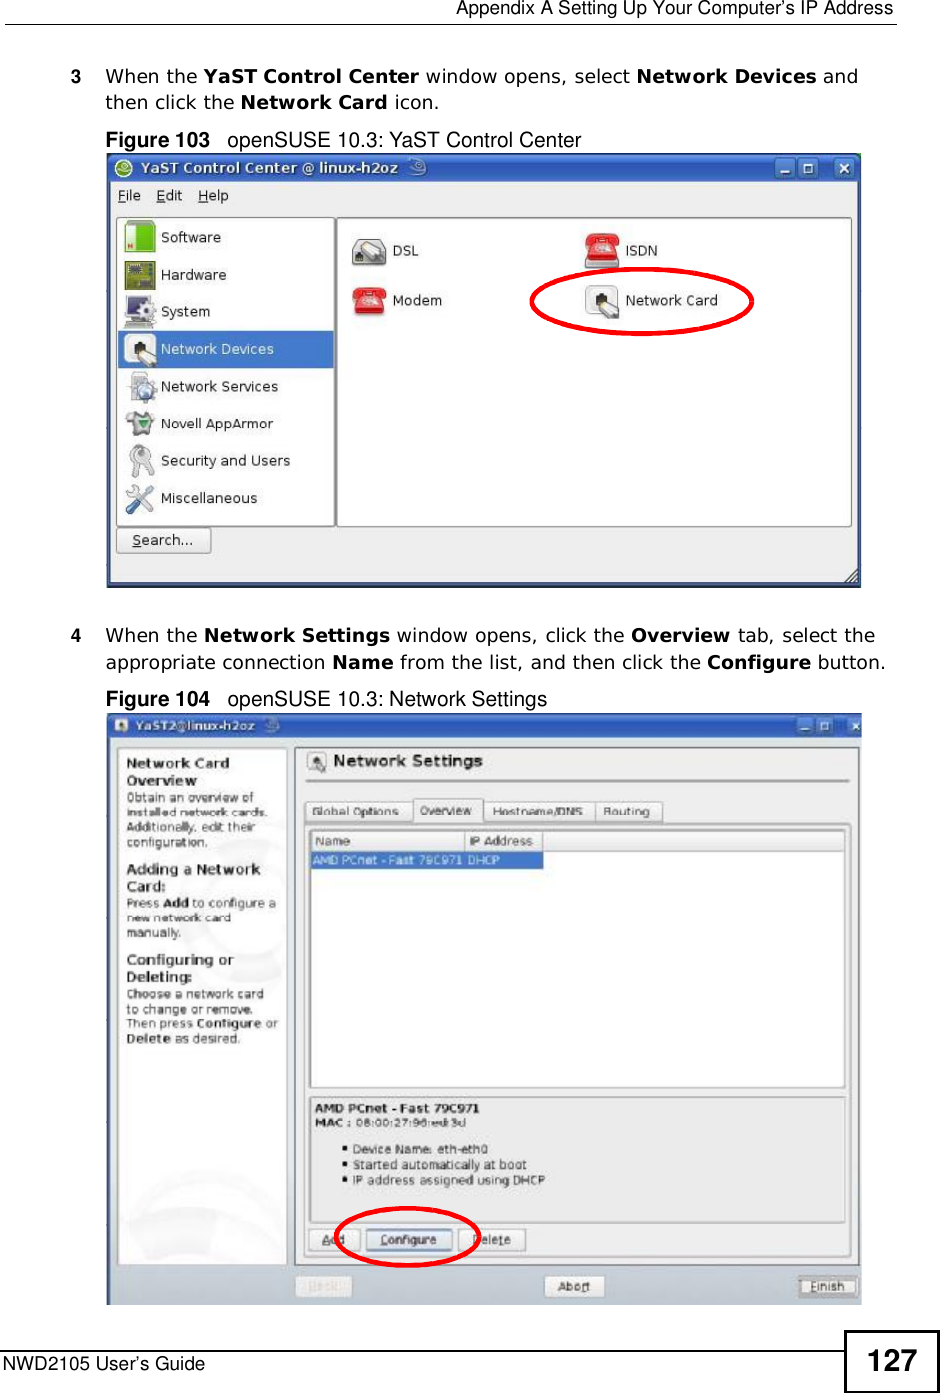  Appendix ASetting Up Your Computer’s IP AddressNWD2105 User’s Guide 1273When the YaST Control Center window opens, select Network Devices and then click the Network Card icon.Figure 103   openSUSE 10.3: YaST Control Center4When the Network Settings window opens, click the Overview tab, select the appropriate connection Name from the list, and then click the Configure button. Figure 104   openSUSE 10.3: Network Settings